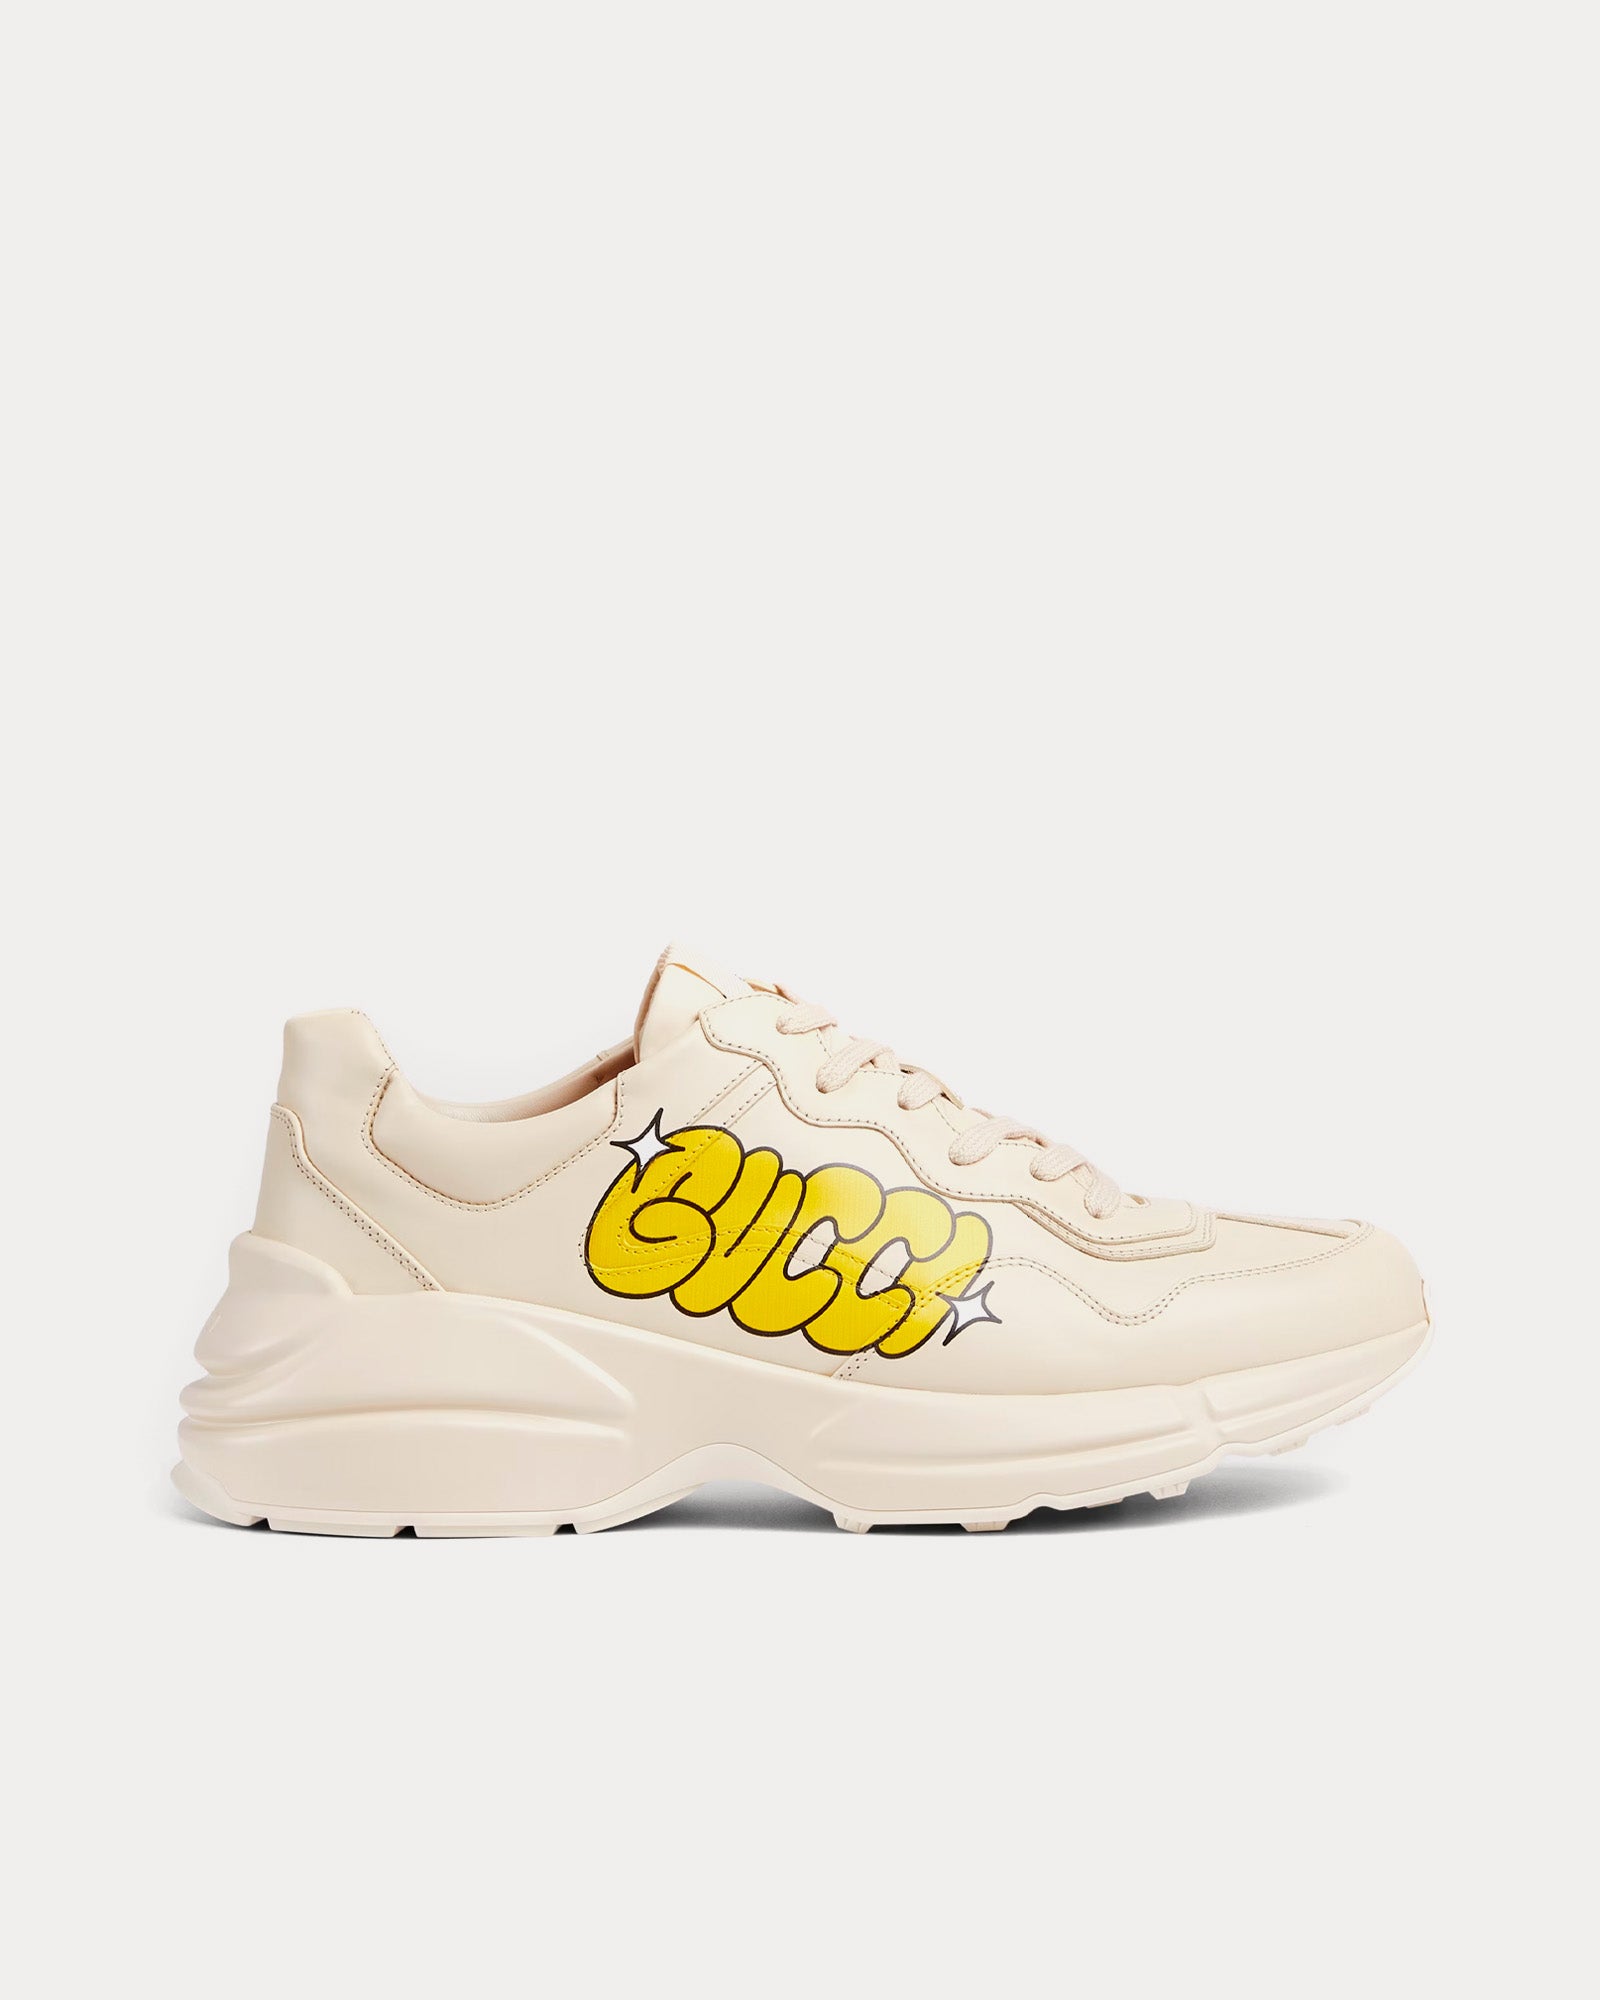 Gucci x Hattie Stewart - Rhyton Serigraphy Leather Off White Low Top Sneakers